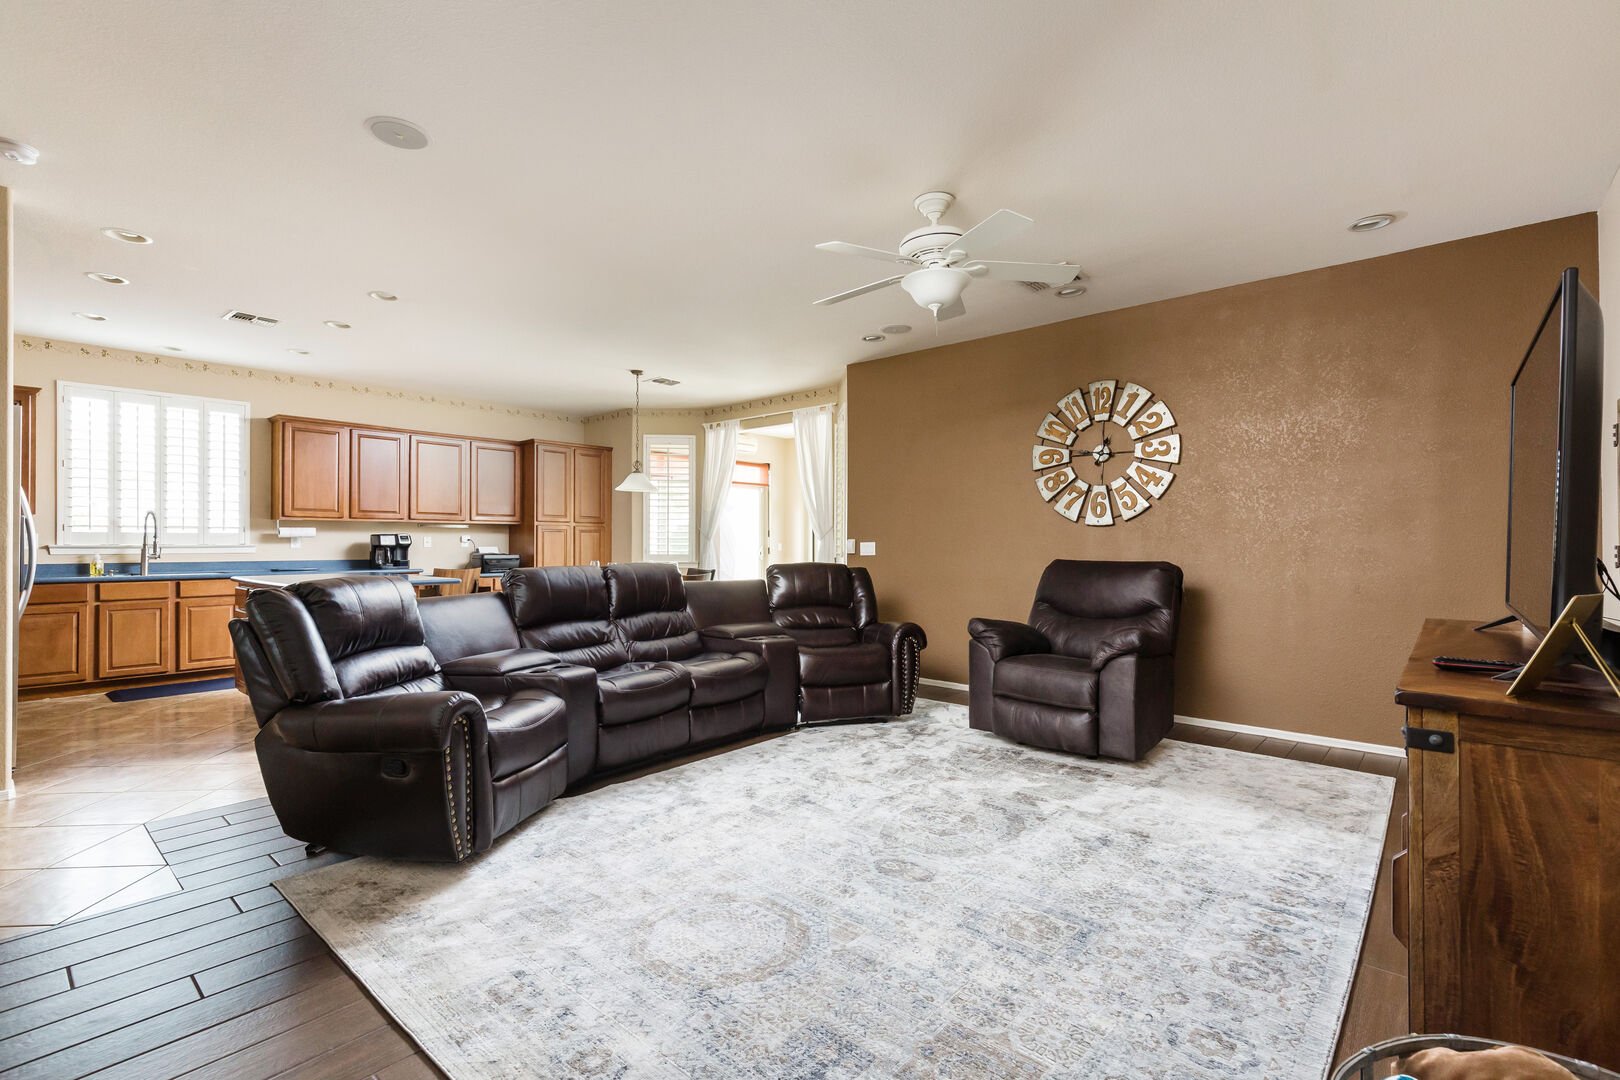 Family room, comfortable seating abound!